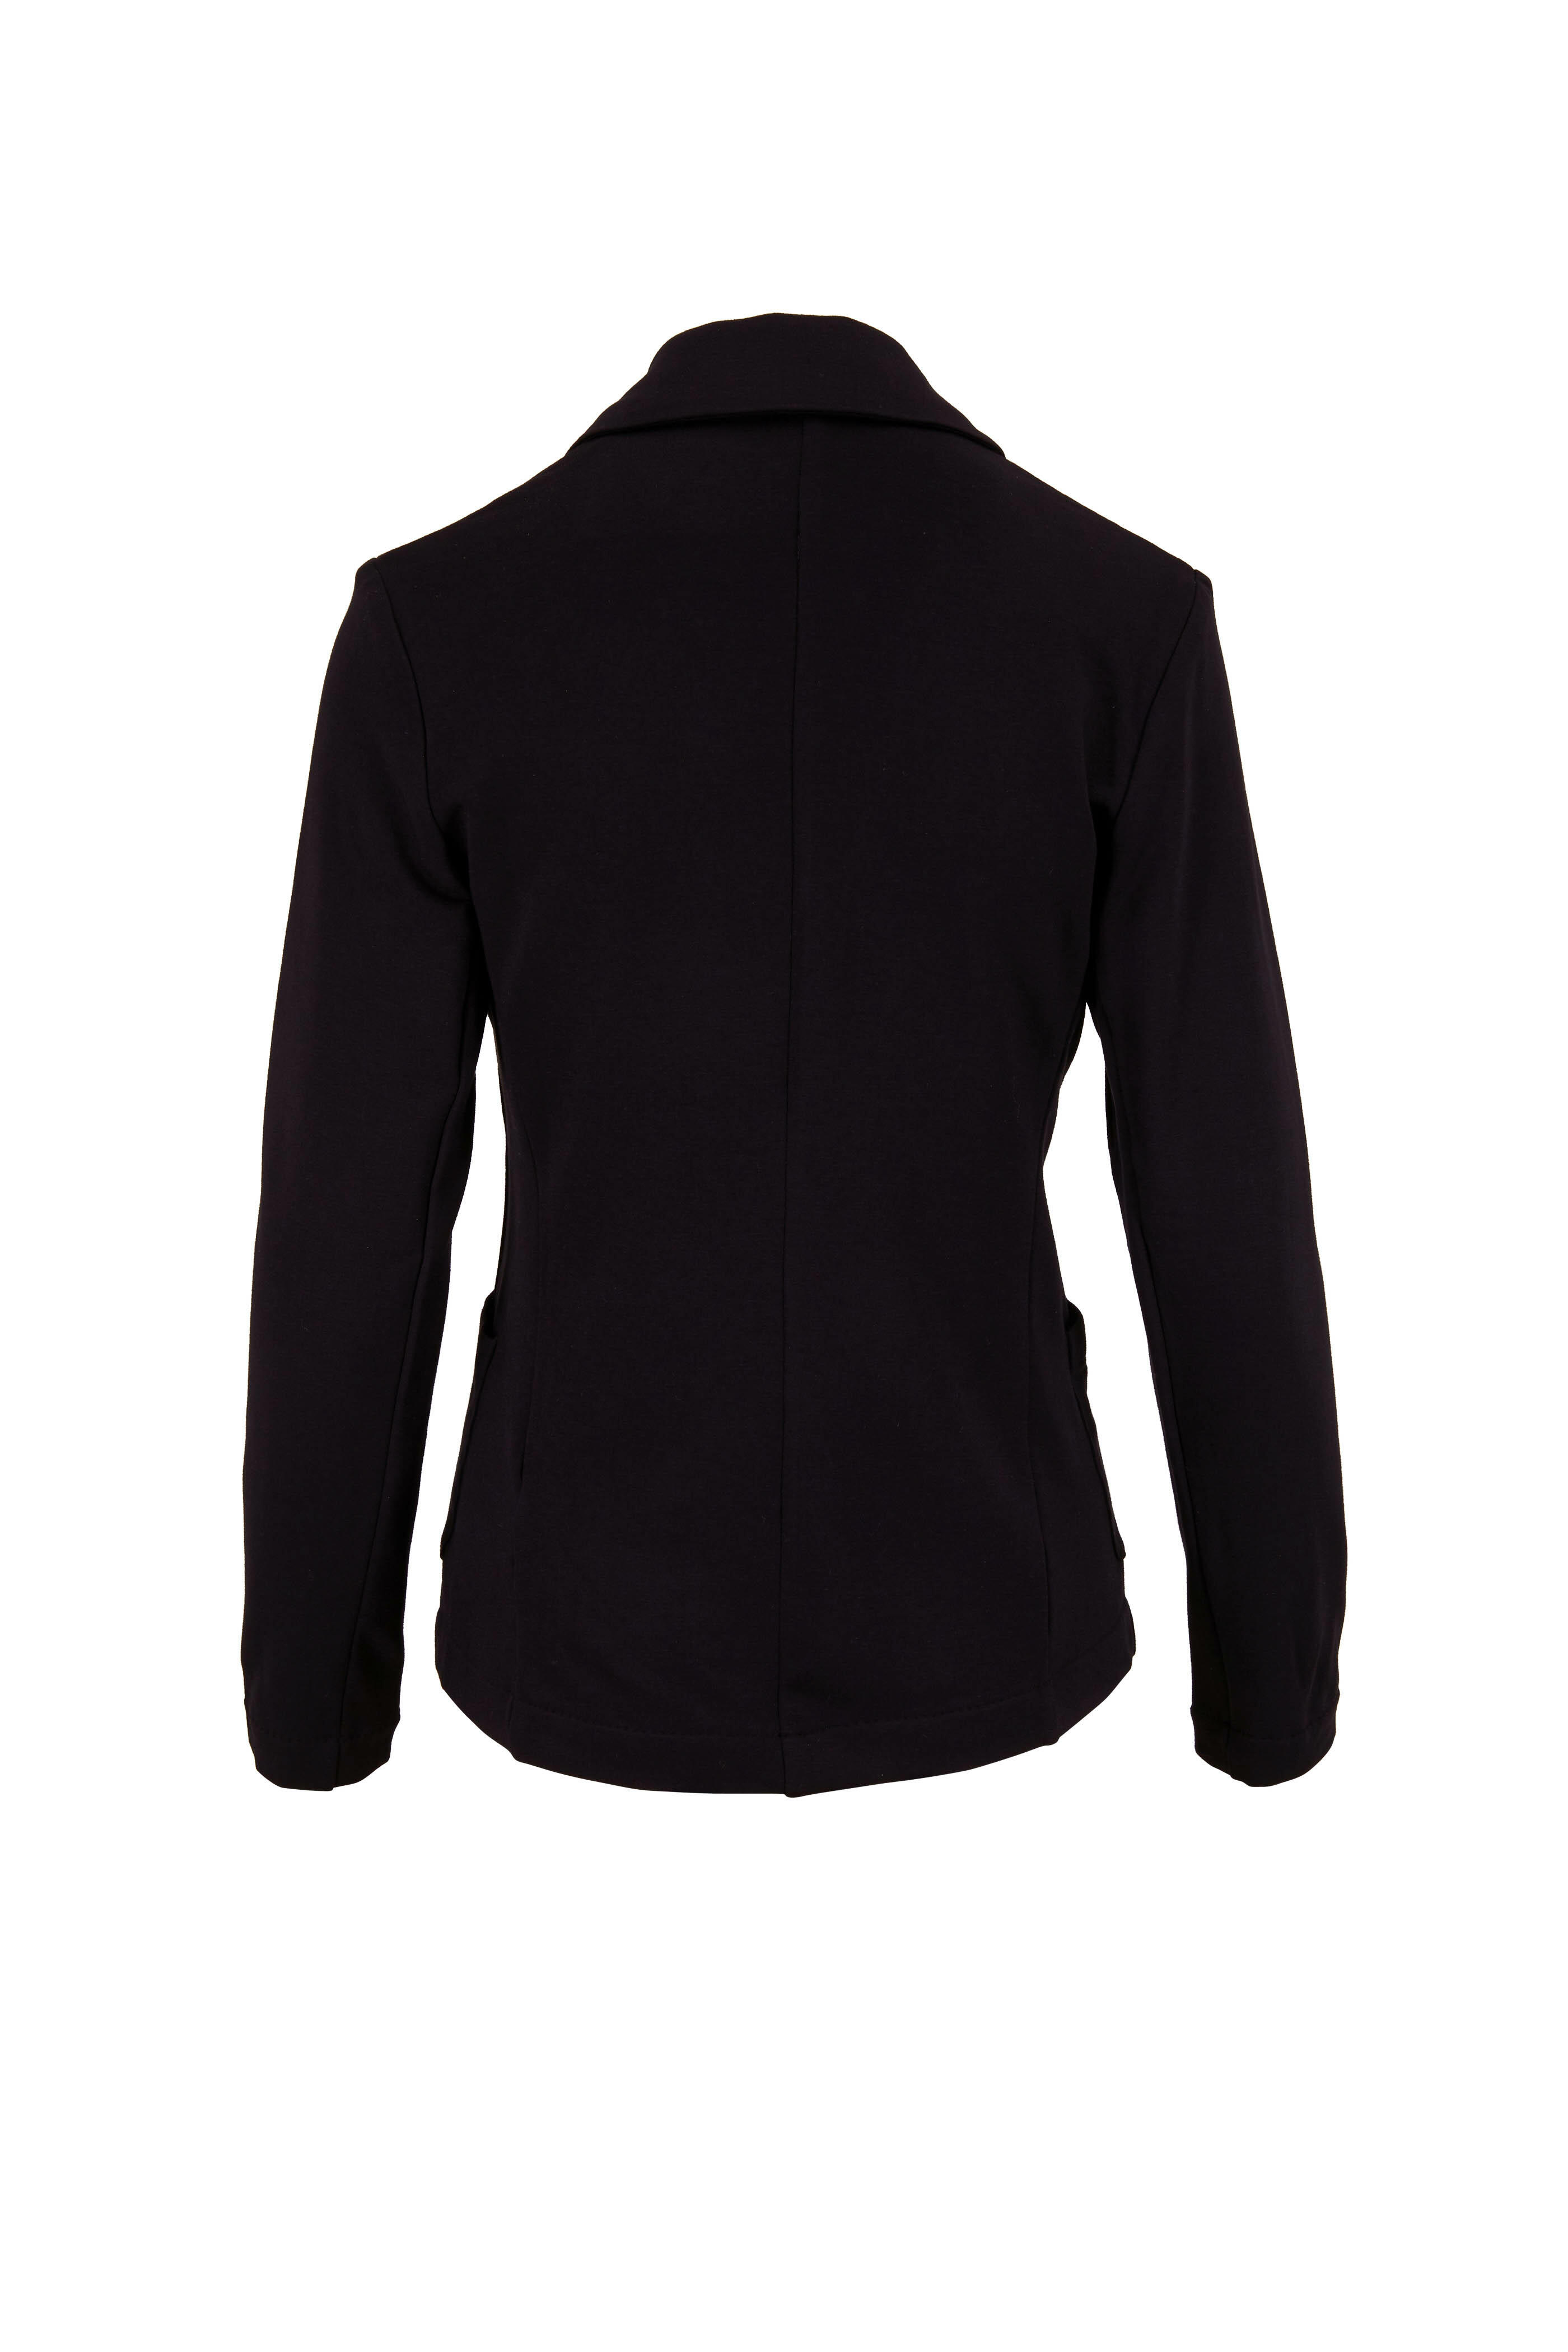 Majestic - Black French Touch One Button Blazer | Mitchell Stores